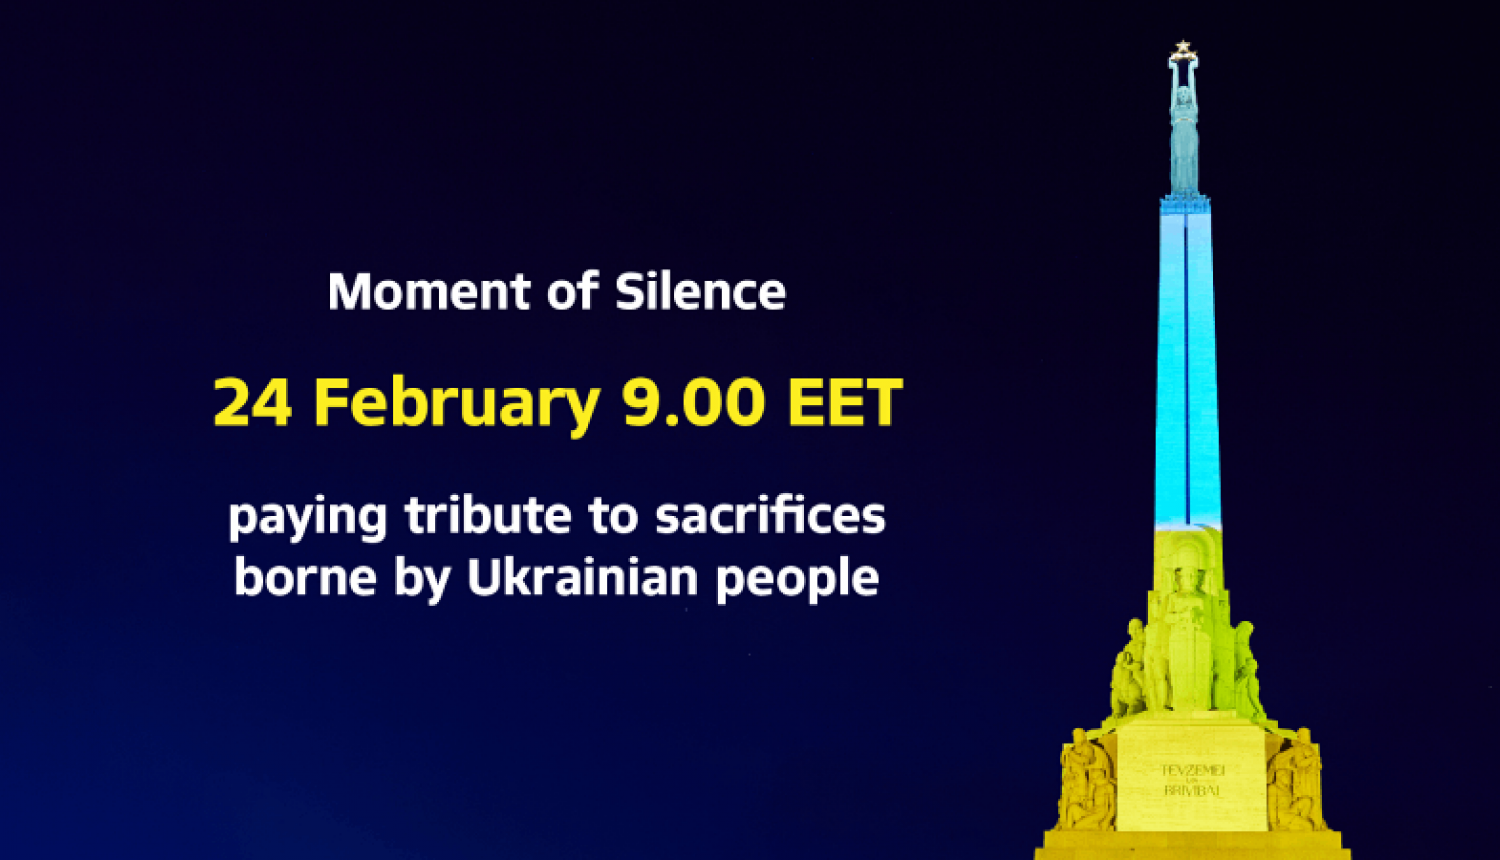 Moment of silence 24 February 9.00